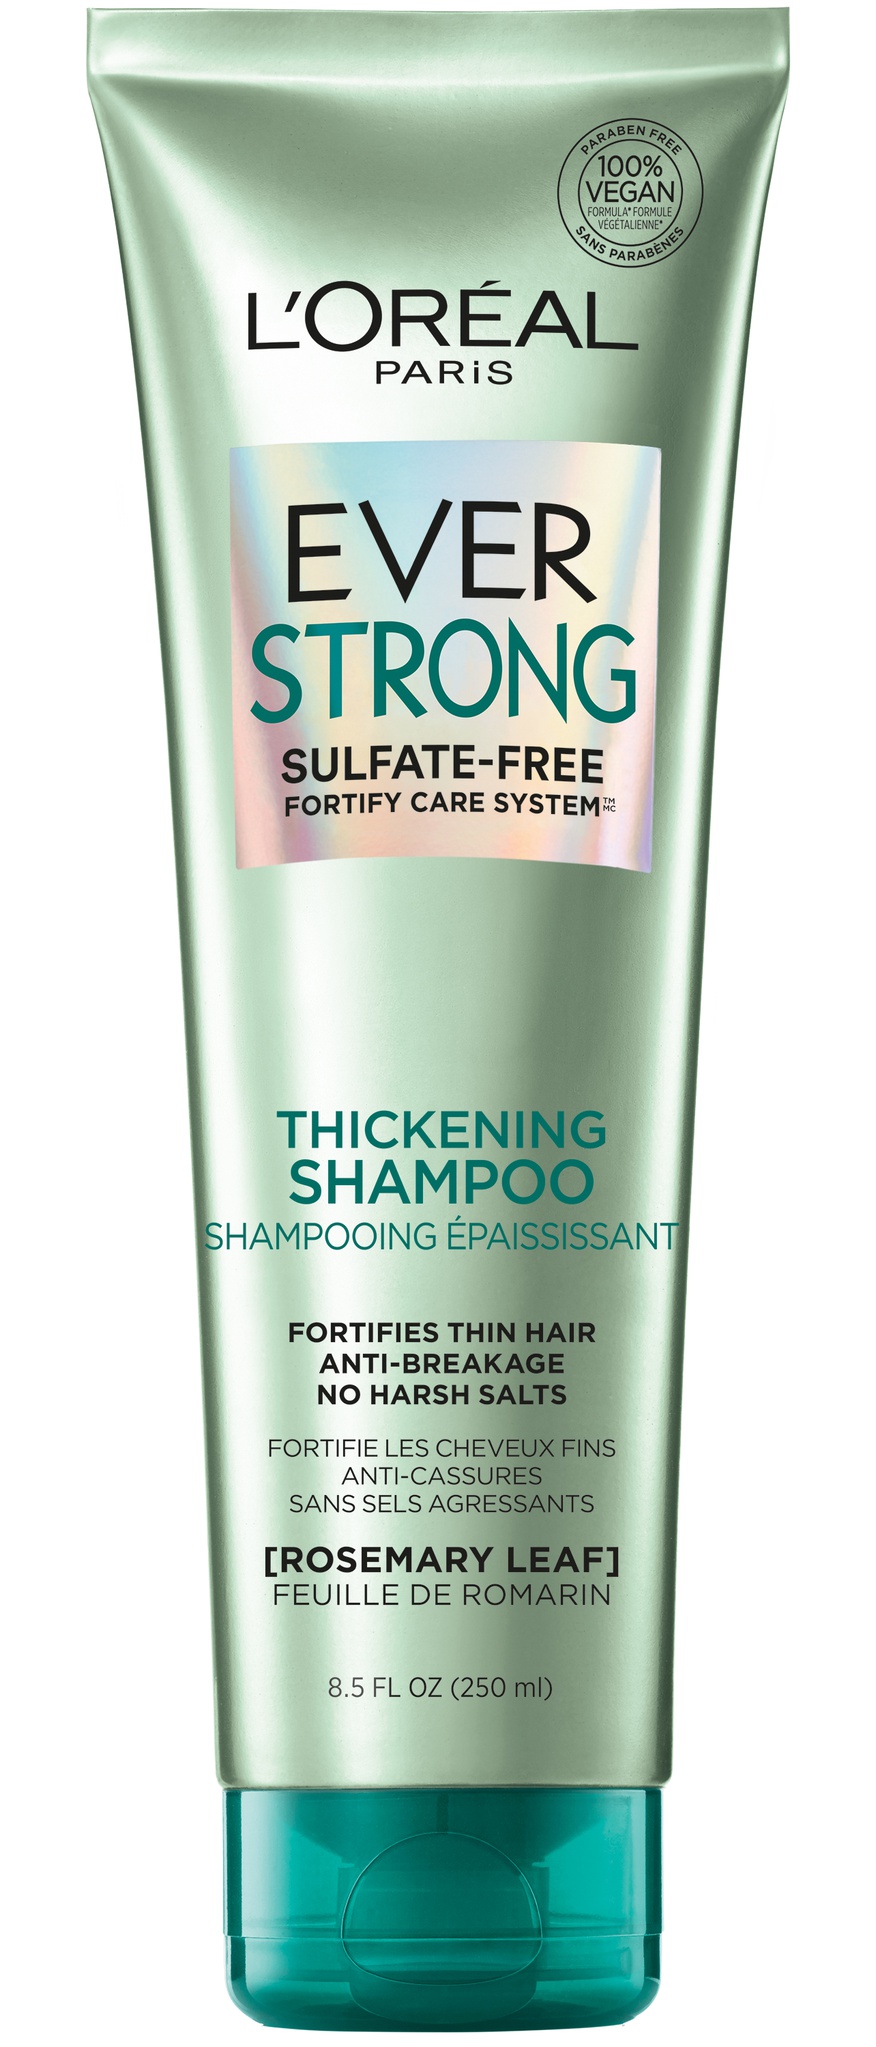 L'Oreal Ever Strong Sulfate-free Thickening Shampoo